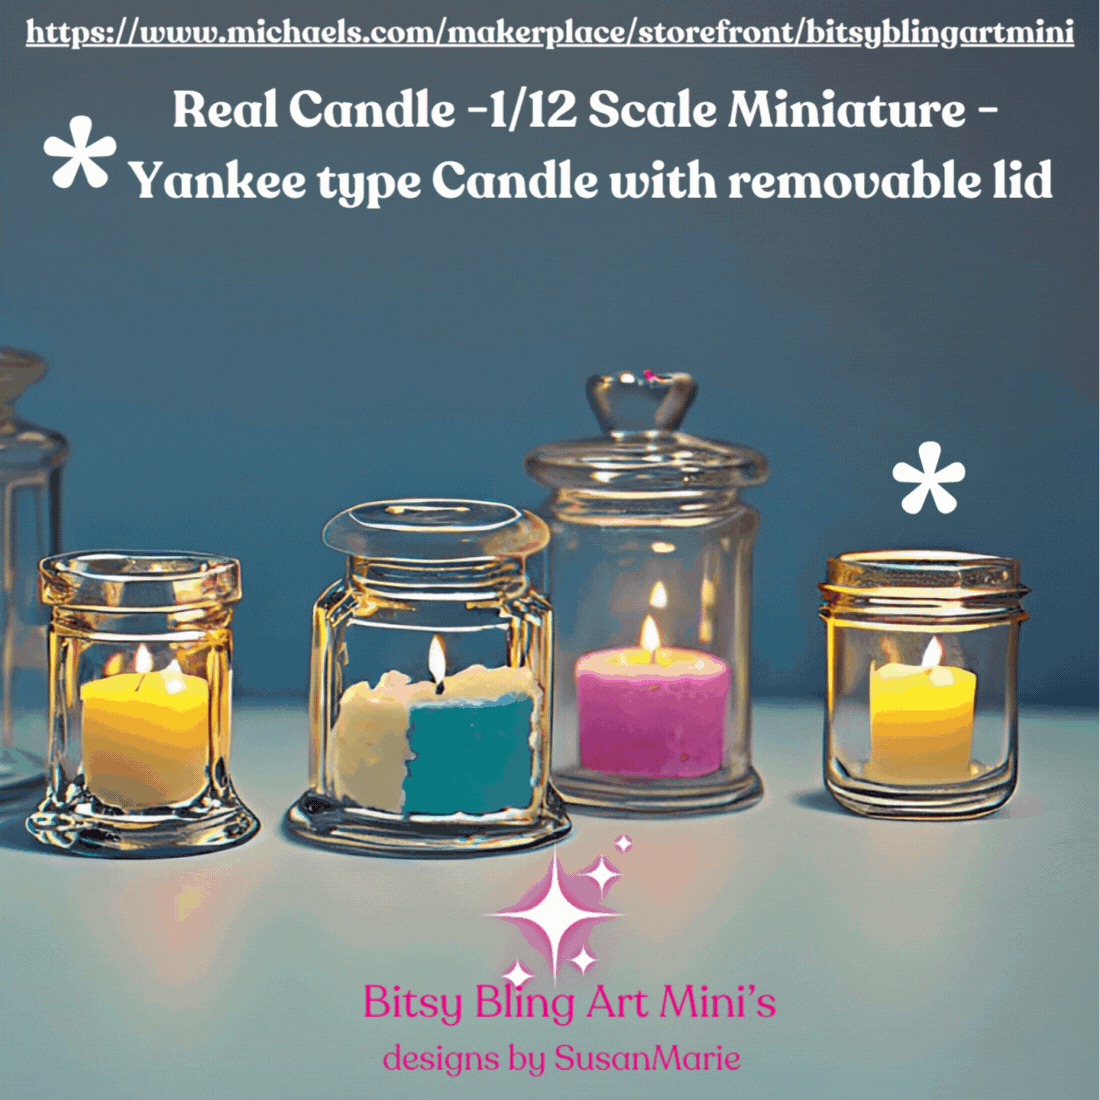 Handmade Miniature Candle for Fashion Dolls with Real Wax a Removable Lid and Wick